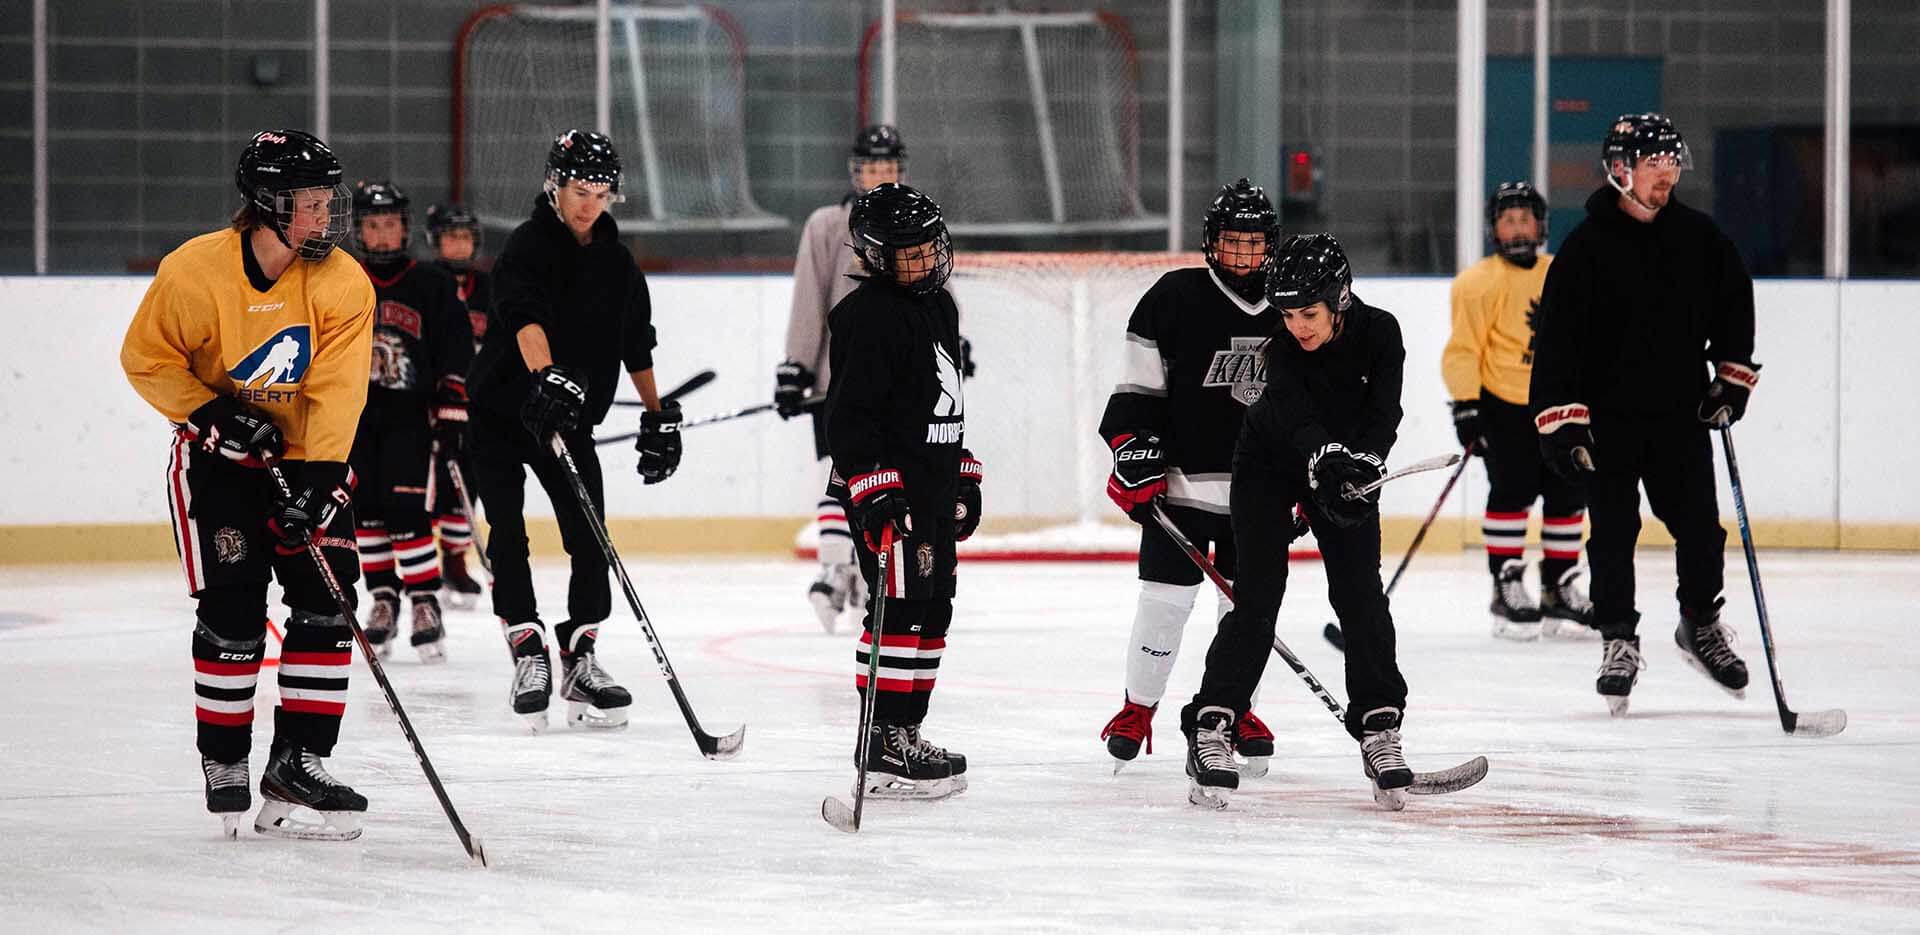 Red Deer Power Skating Lessons - July 25-29